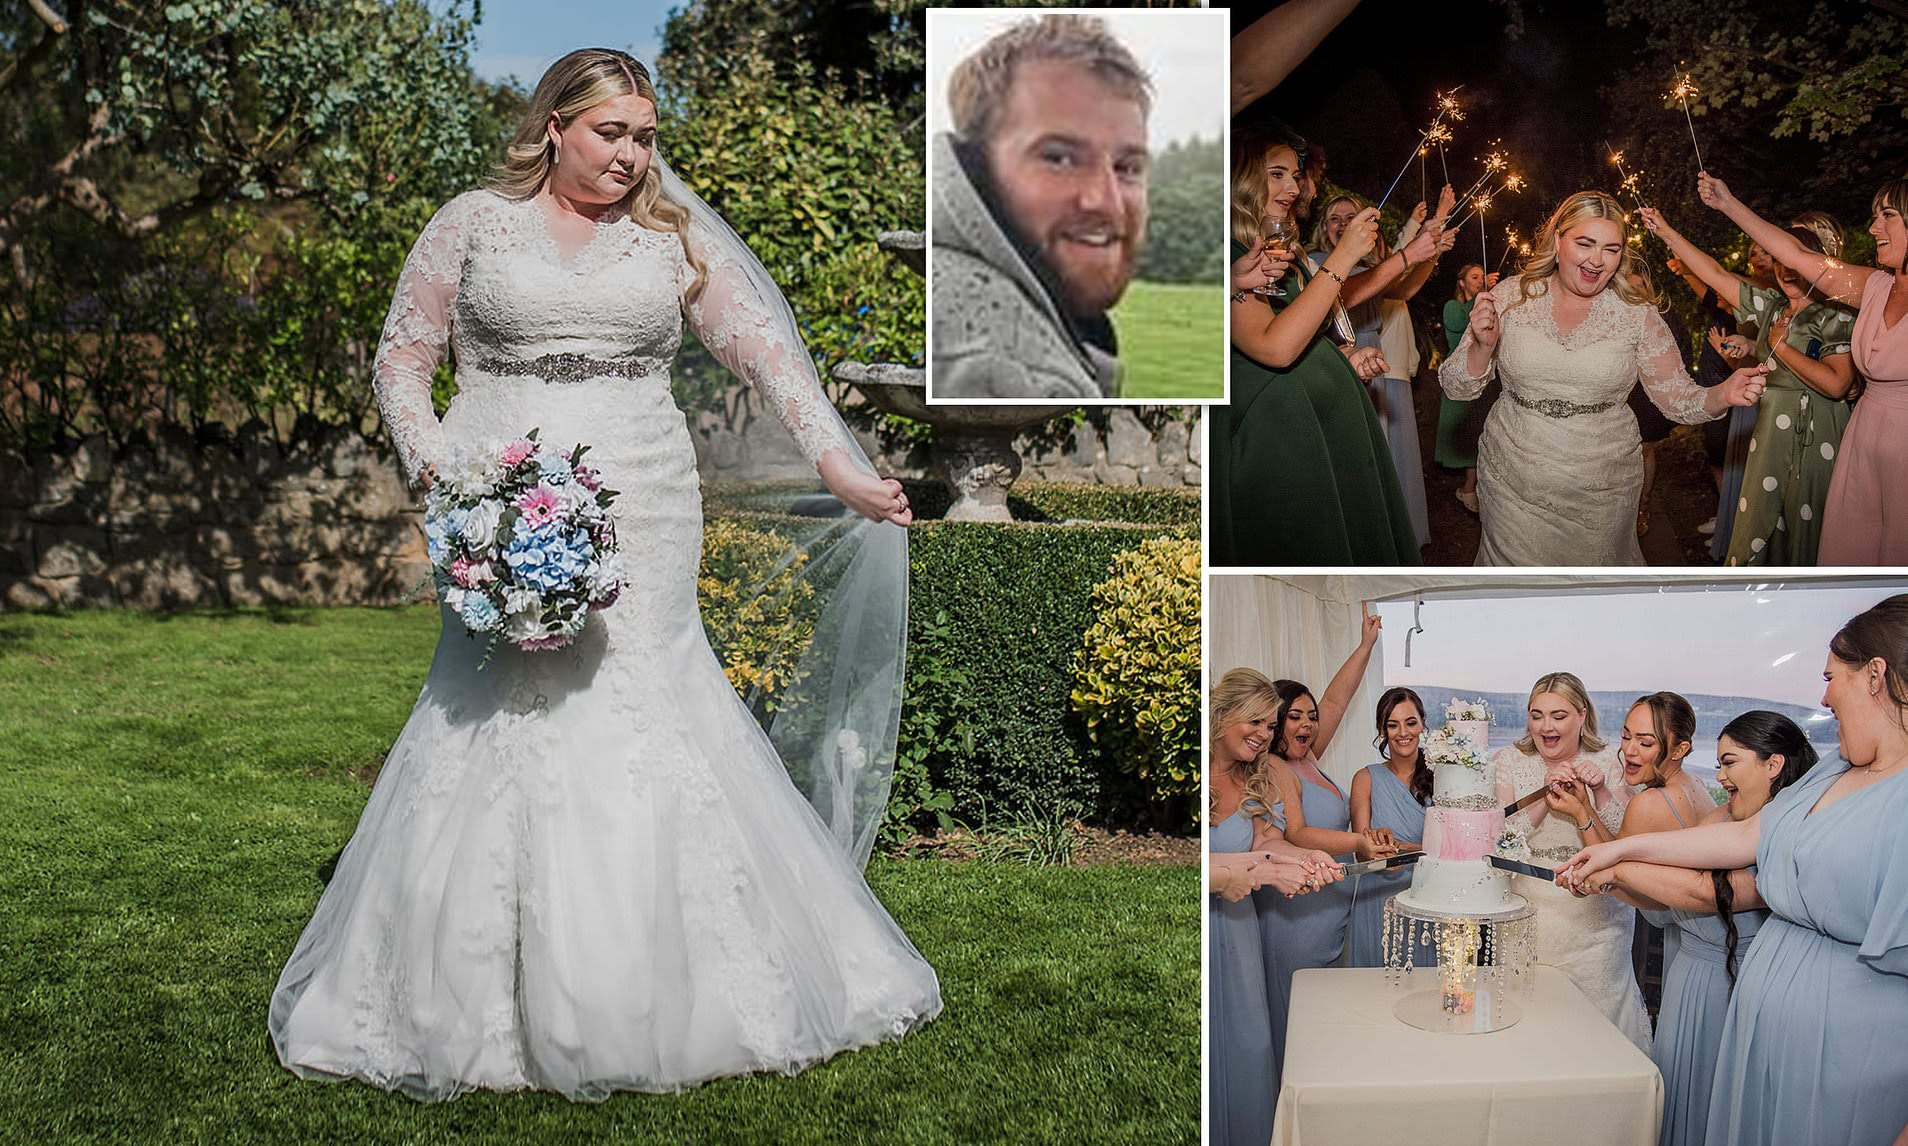 Plucky bride reveals why she went ahead with £12,000 wedding day despite being jilted